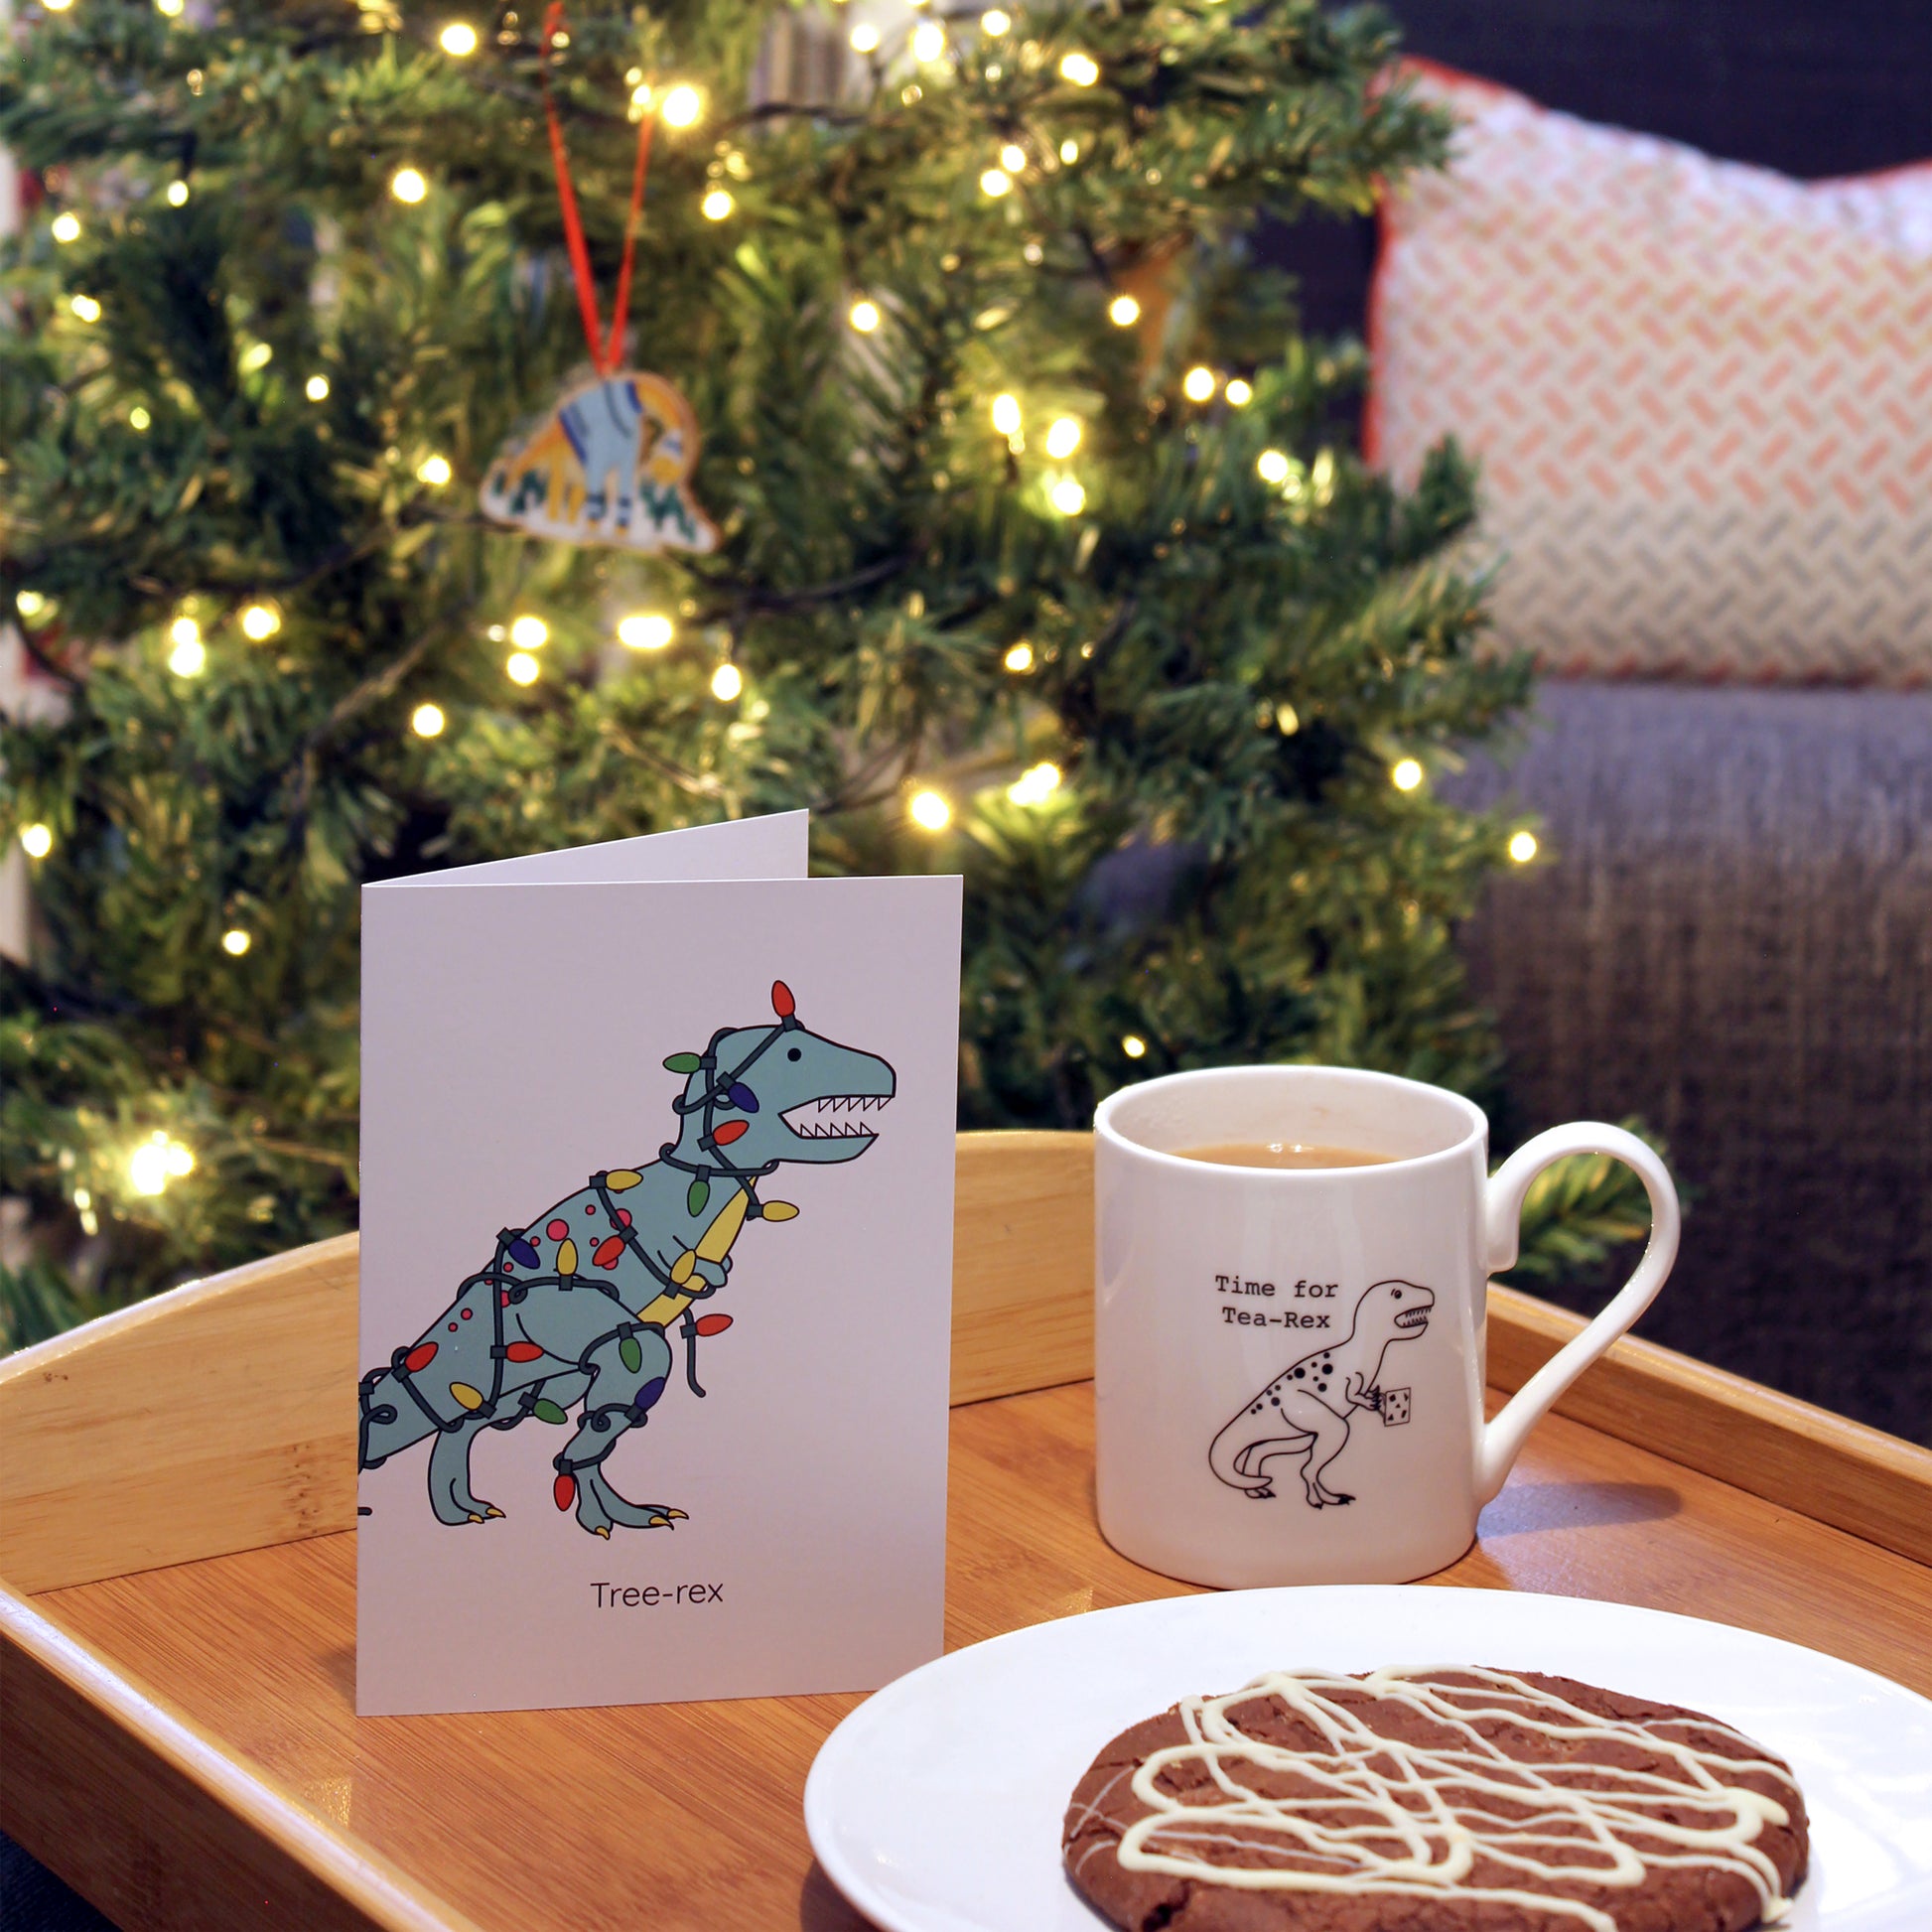 tree-rex greeting card on a tray with a cookie and a cup of tea, there is a Christmas tree in the background